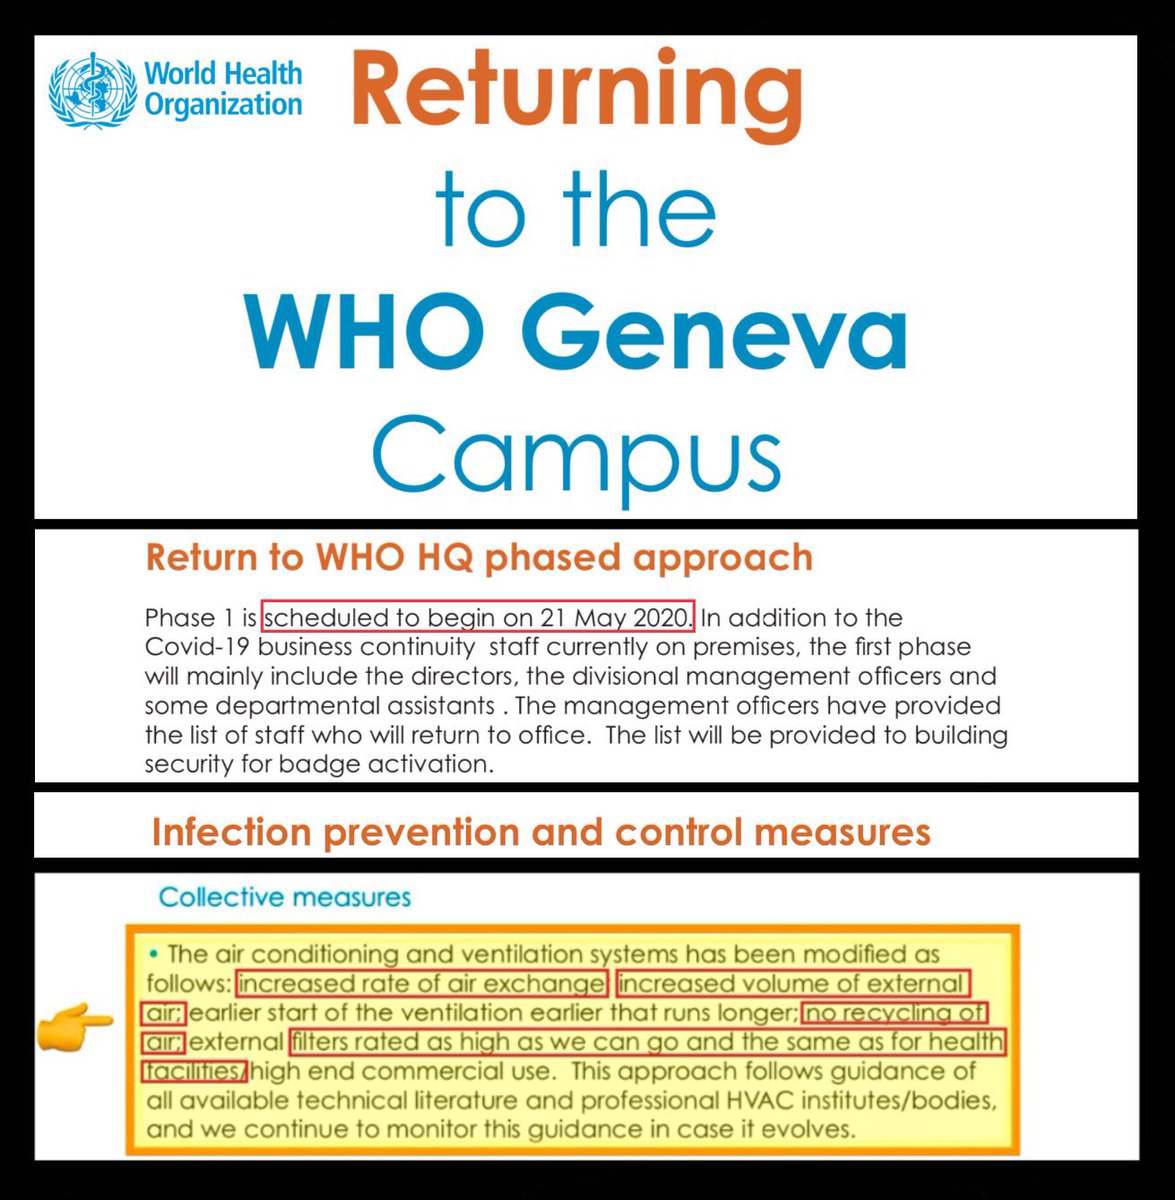 Pretty sure the @WHO staff that worked at the Geneva campus faired much better than the rest of the average working people, or our schools, our LTC centres, our hospitals, on and on. Clean air and safer working conditions for them. 
For us? It’s the Hunger Games. 
#DavosSafe